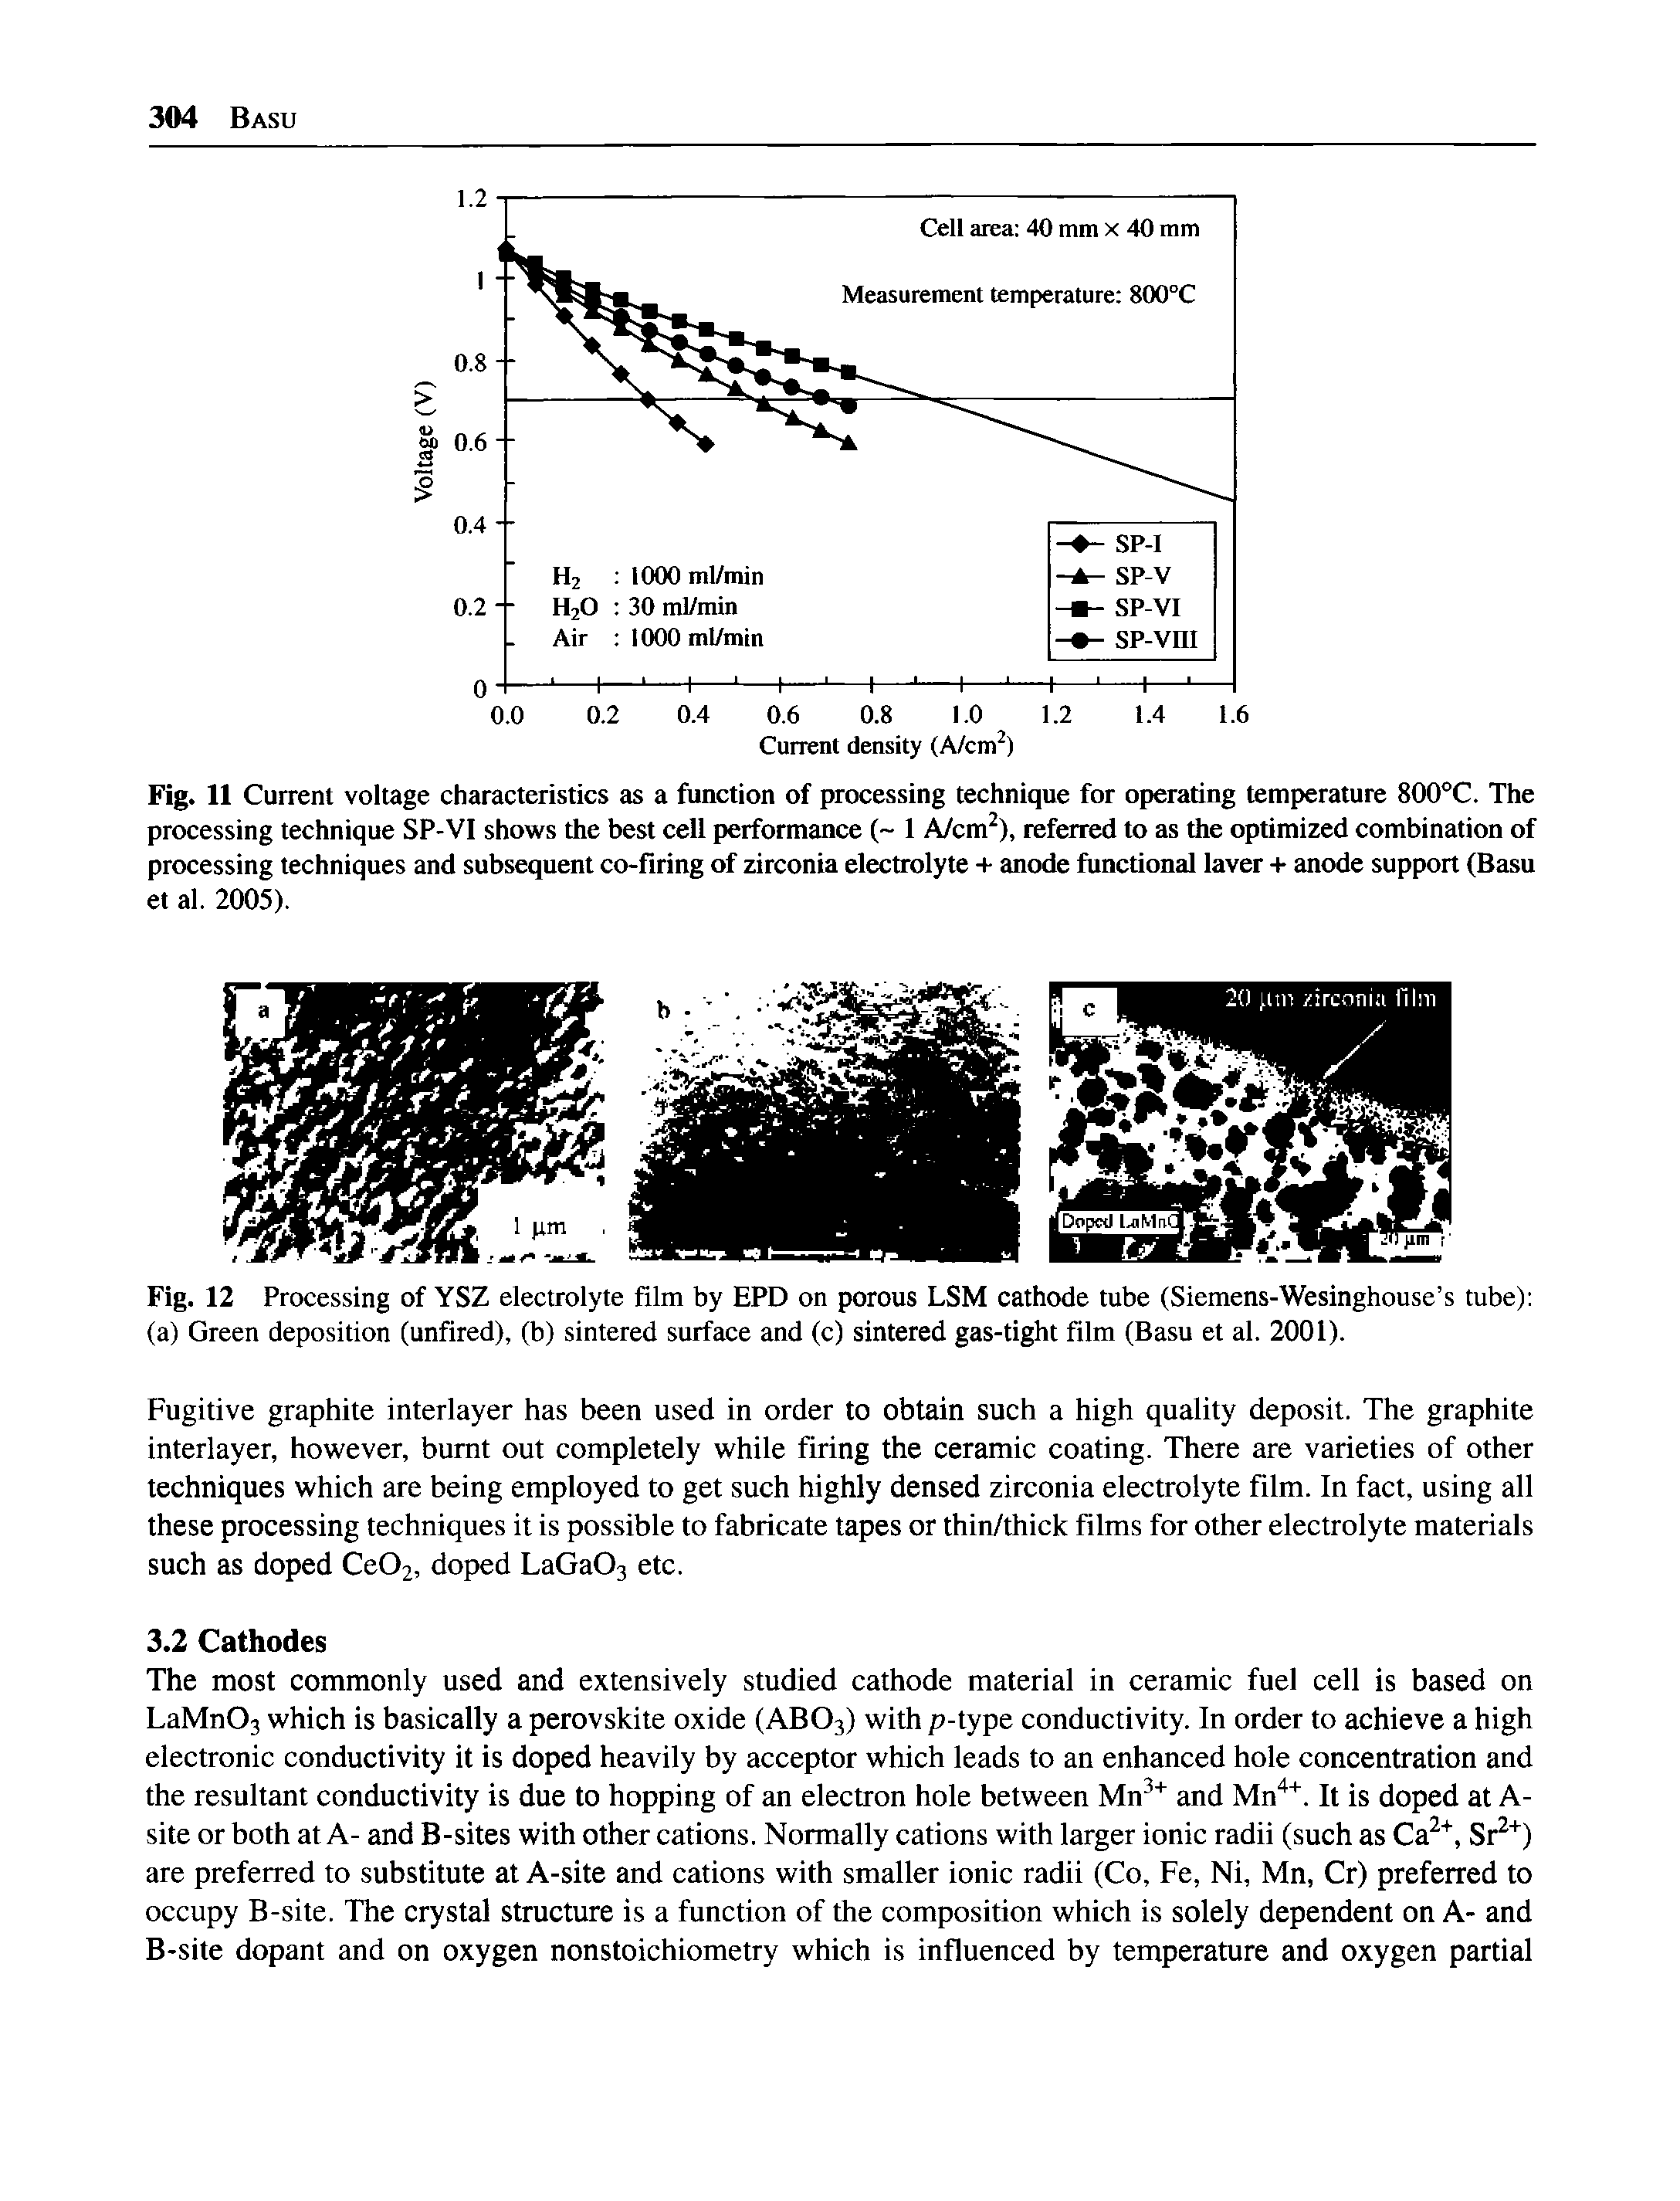 Fig. 11 Current voltage characteristics as a function of processing technique for operating temperature 800 C. The processing technique SP-VI shows the best cell performance ( 1 A/cm ), referred to as the optimized combination of processing techniques and subsequent co-firing of zirconia electrolyte + anode functional laver + anode support (Basu et al. 2005).